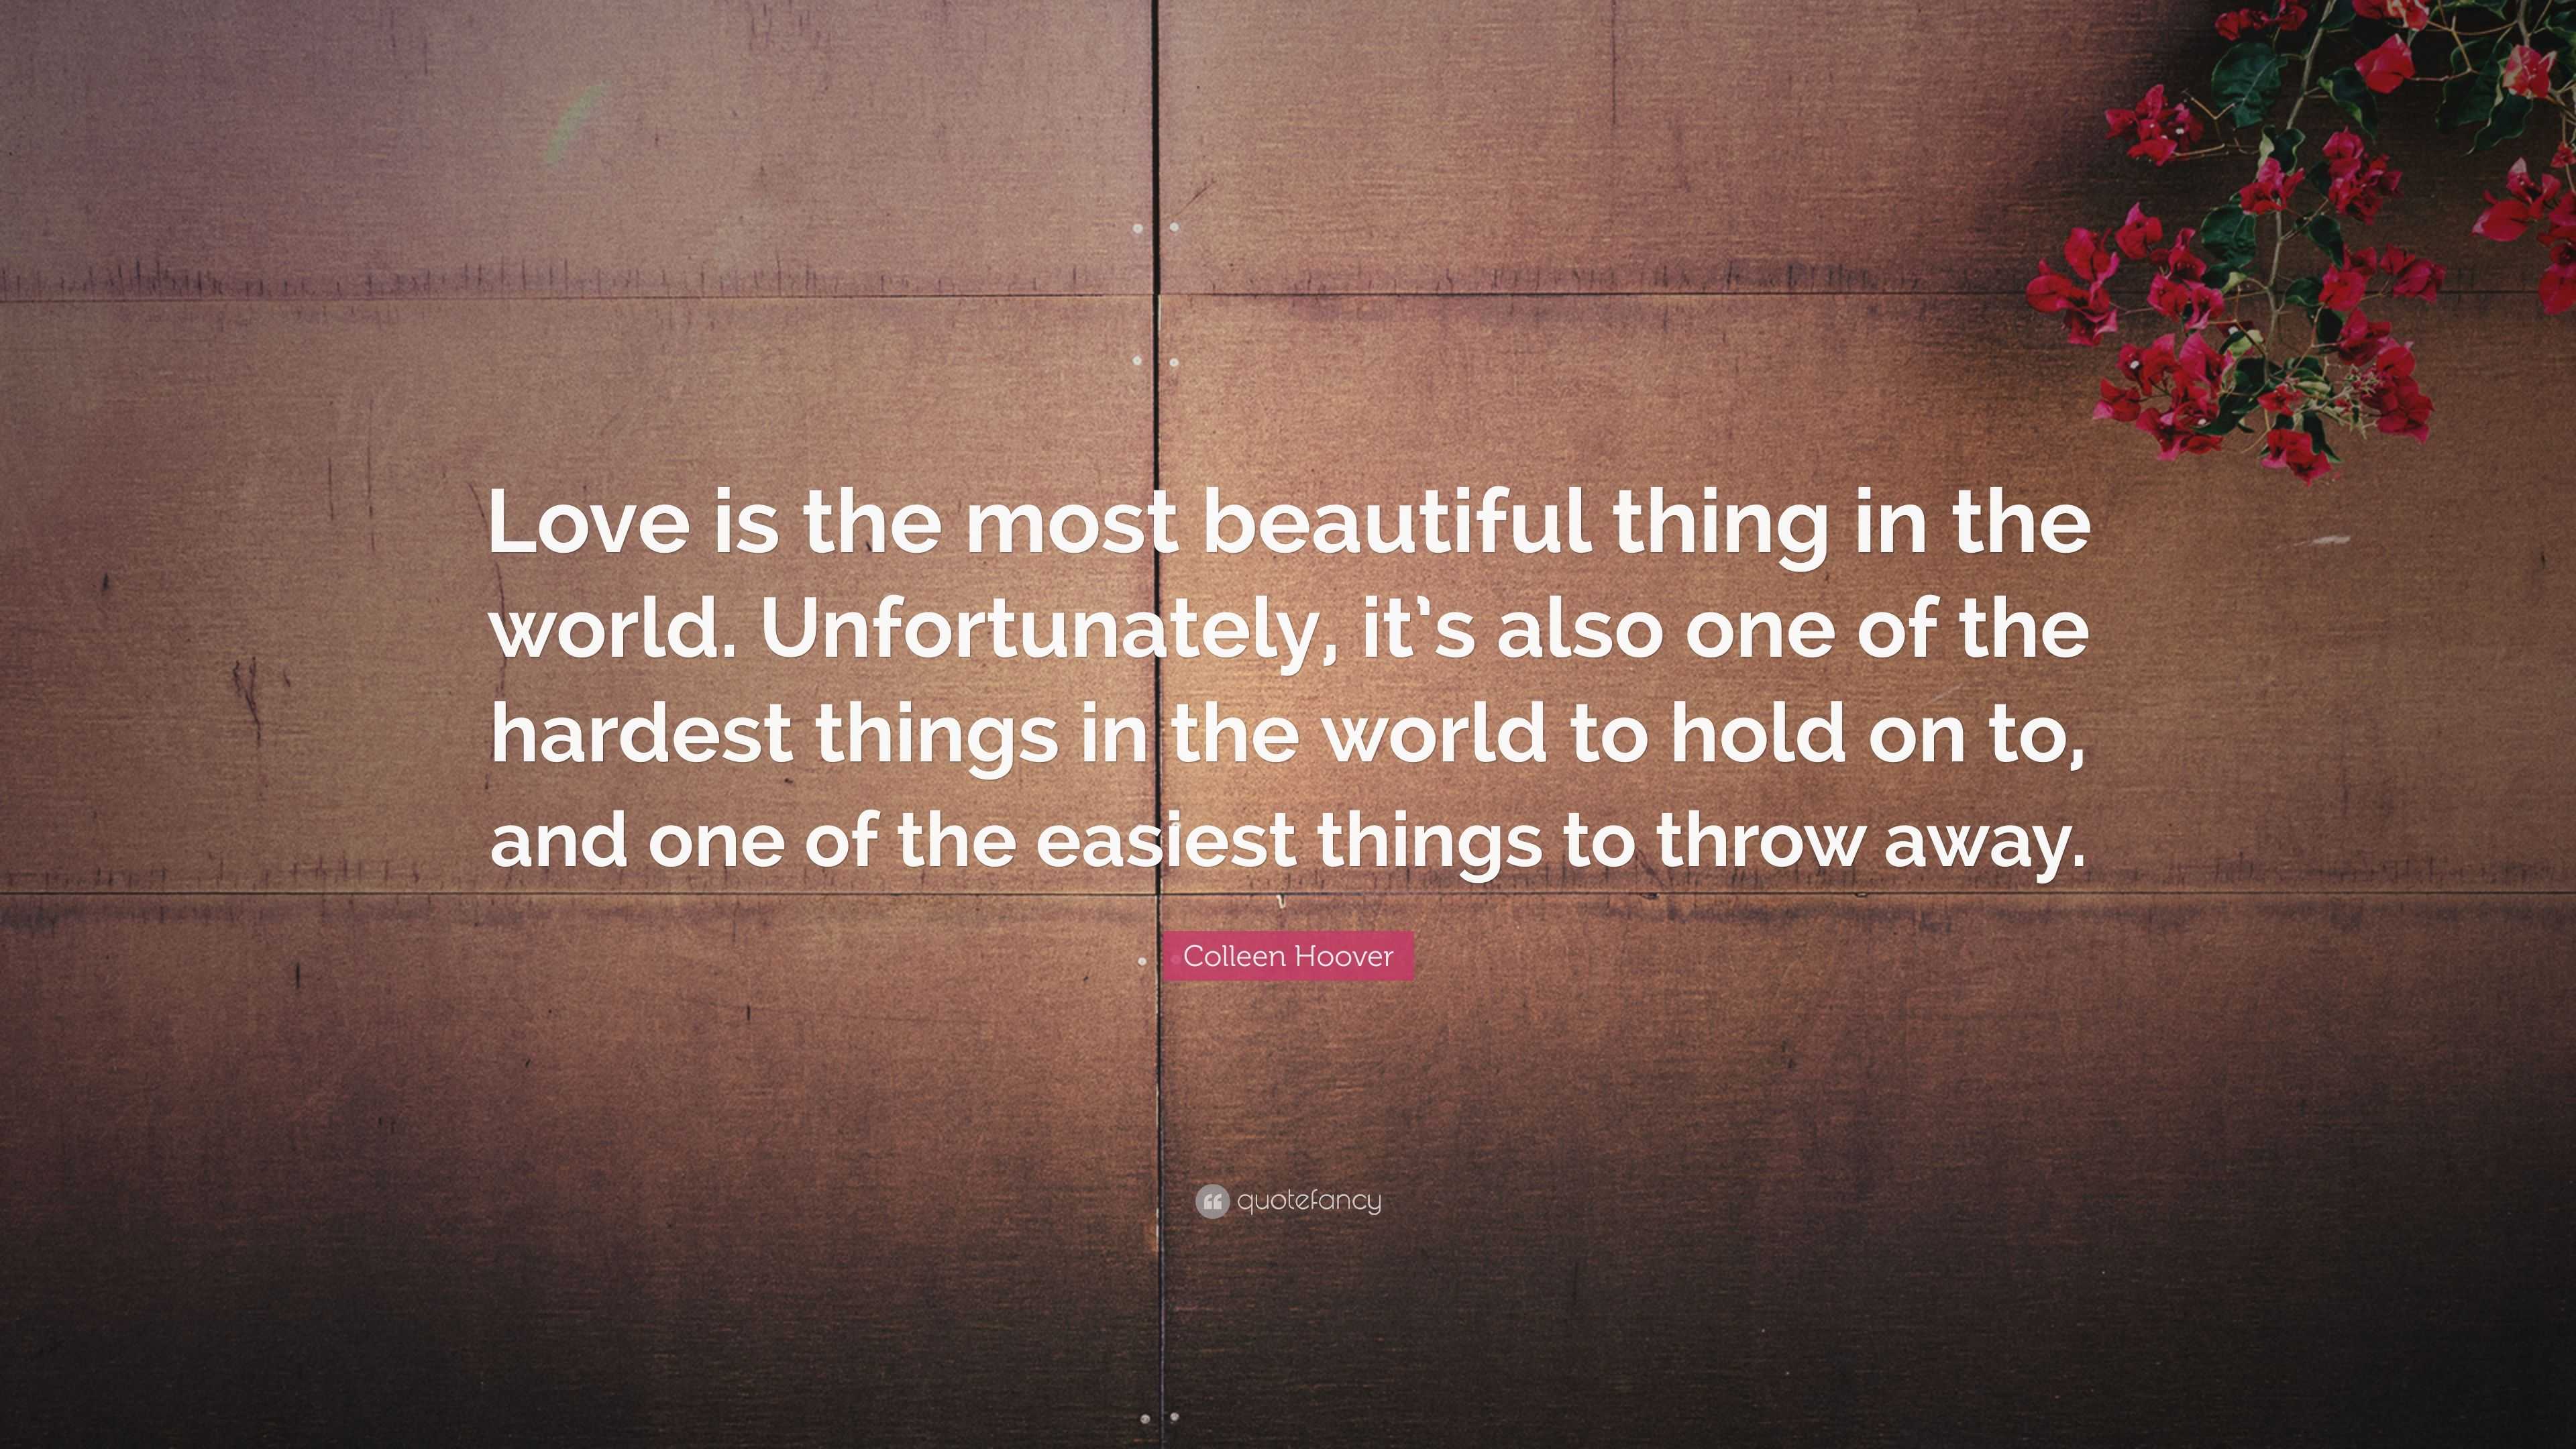 Colleen Hoover Quote “Love is the most beautiful thing in the world Unfortunately